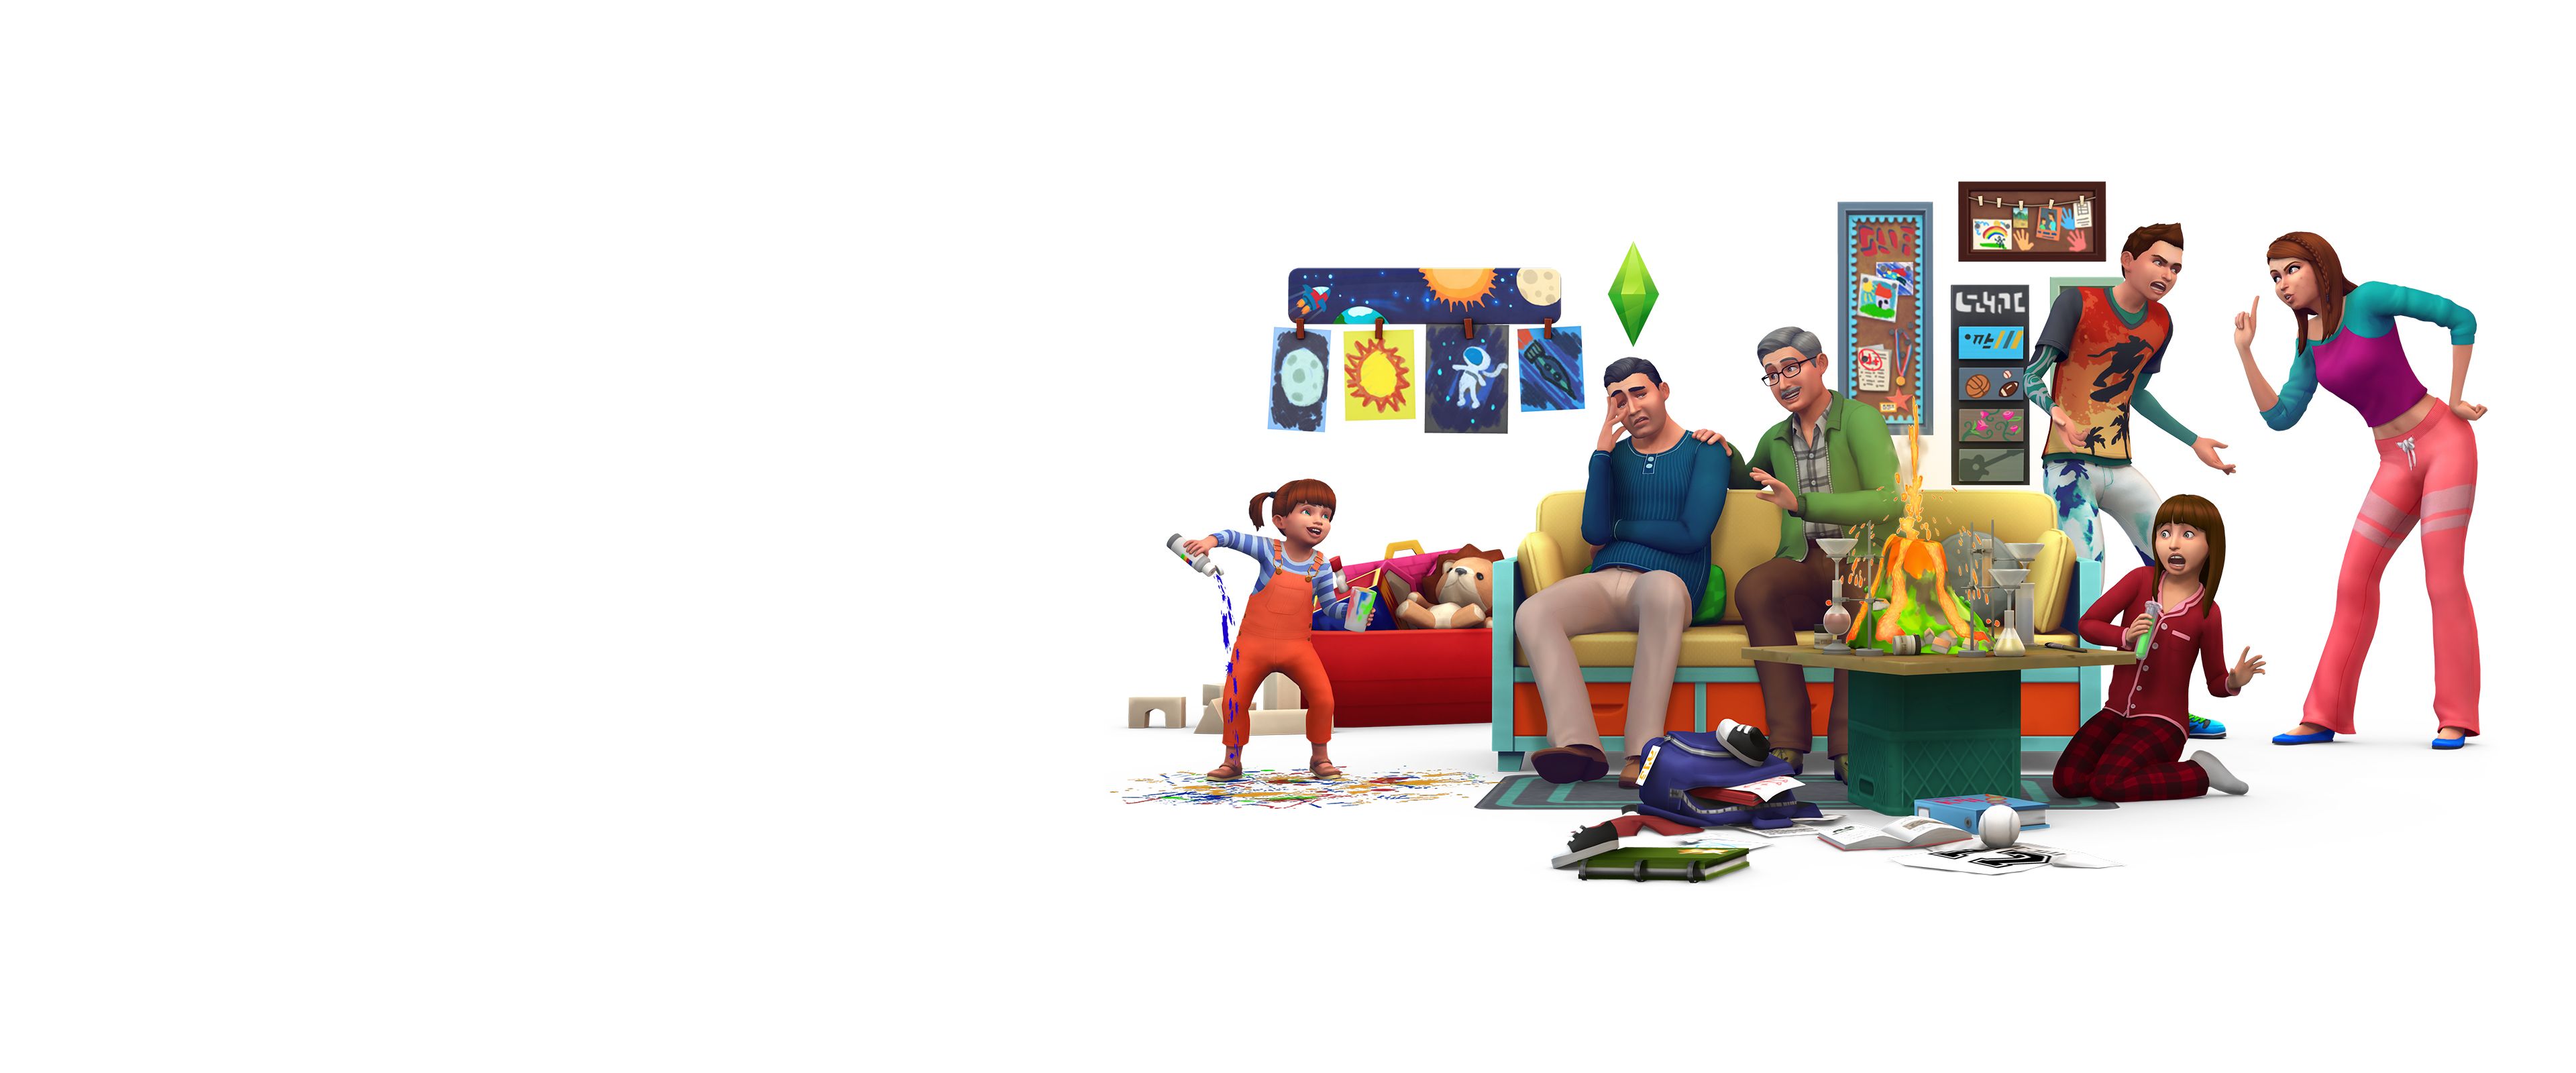 Sims 4 expansion and stuff packs free download